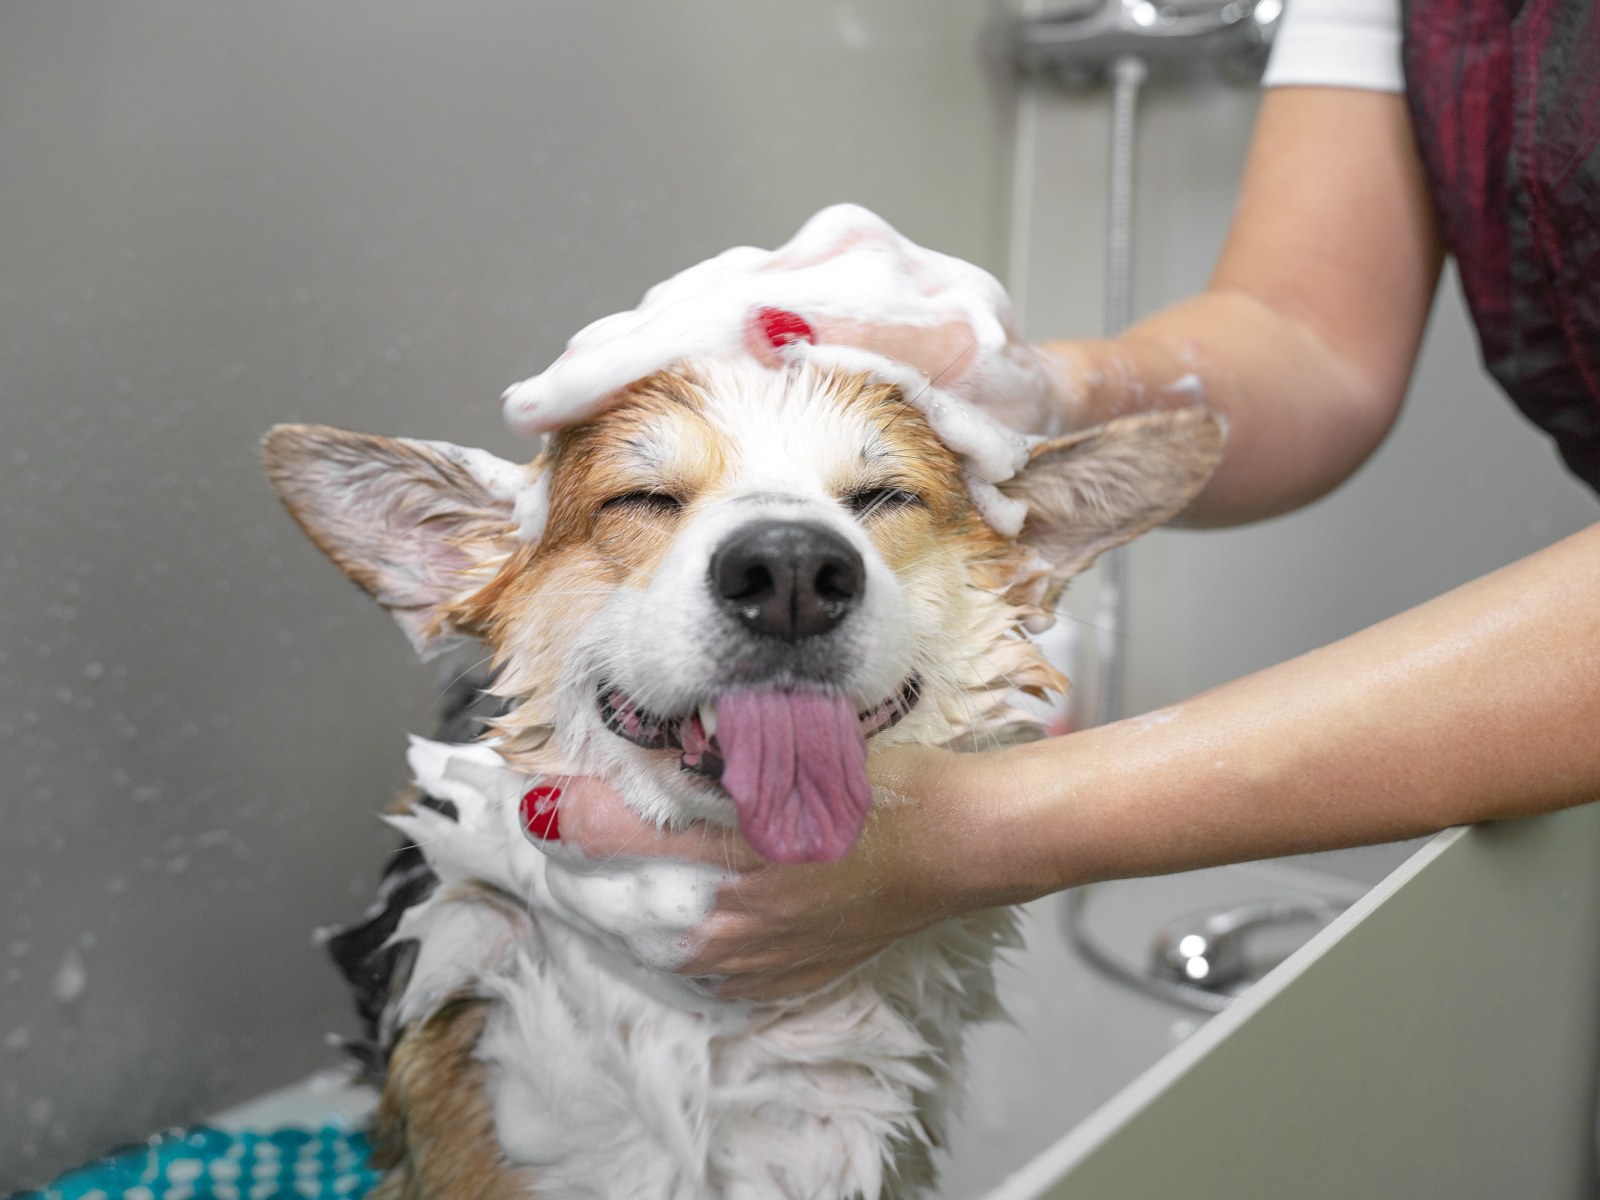 What To Do If A Dog Gets Soap In Its Eye